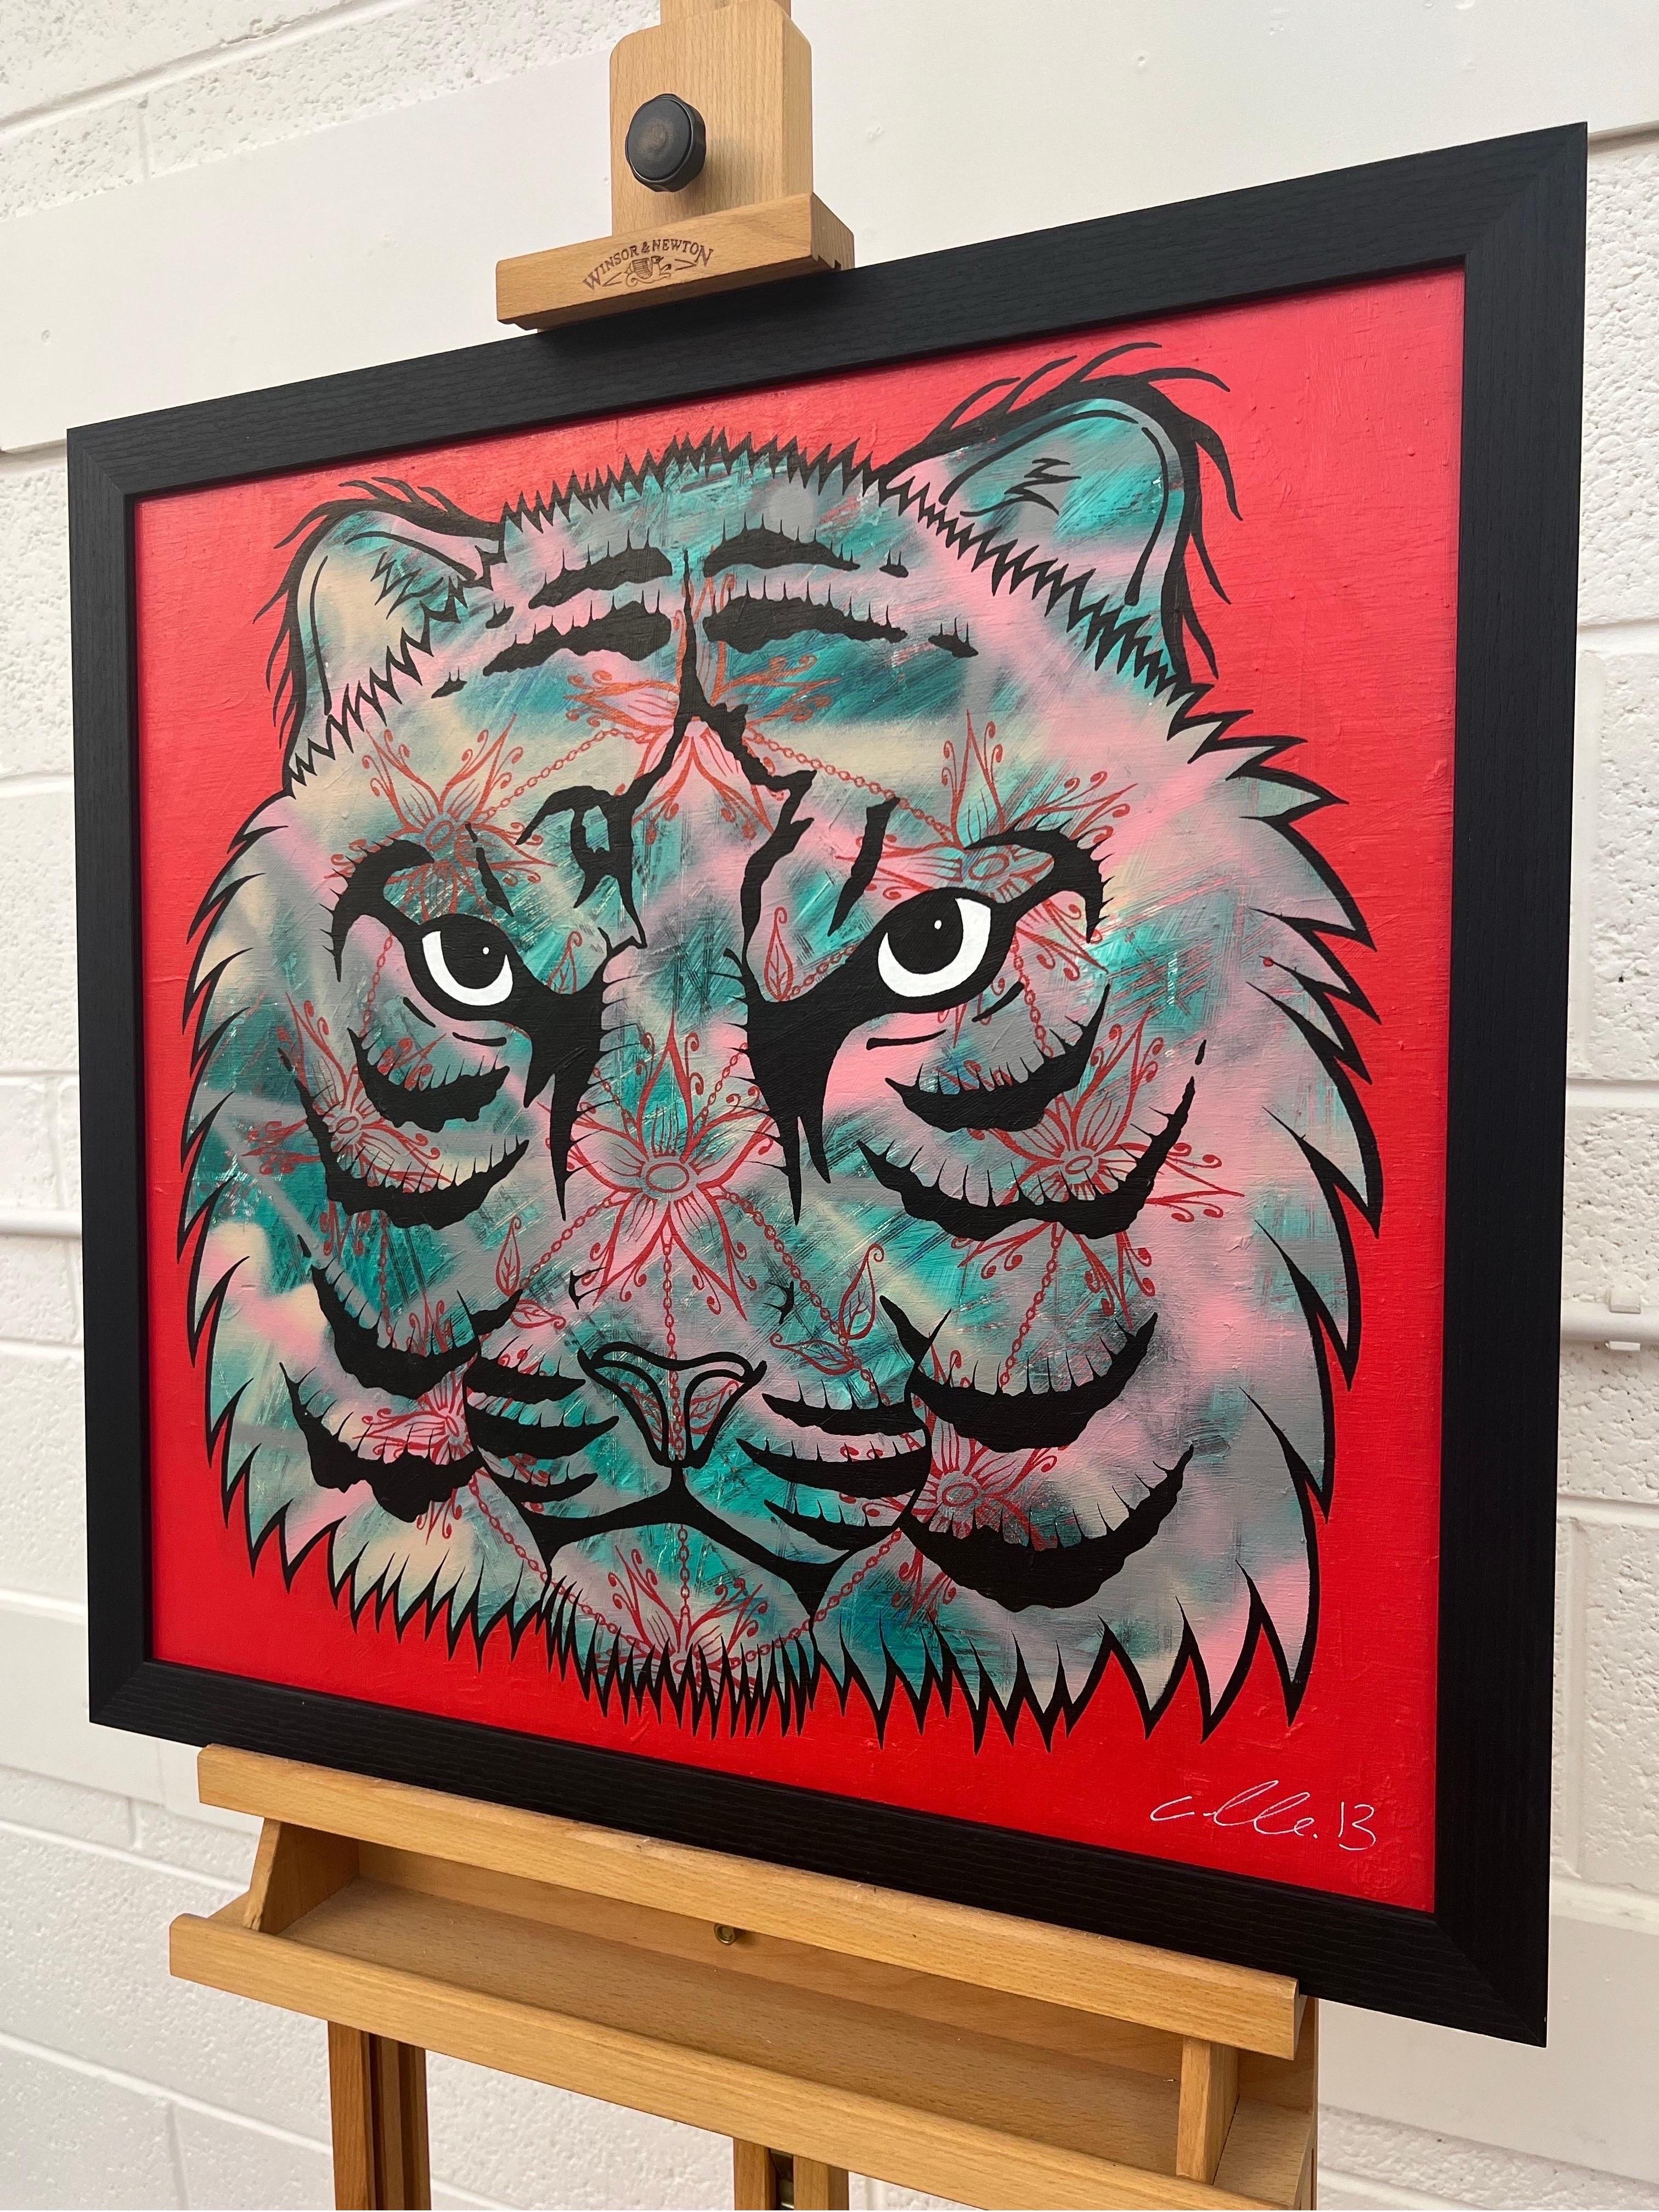 Tiger Portrait Pop Art with Floral Mandala in Chains by British Urban Graffiti Artist, Chris Pegg, using red, pink & turquoise. Chris Pegg is a self-taught Street Artist producing artwork with a strong social commentary.  

His work is inspired by